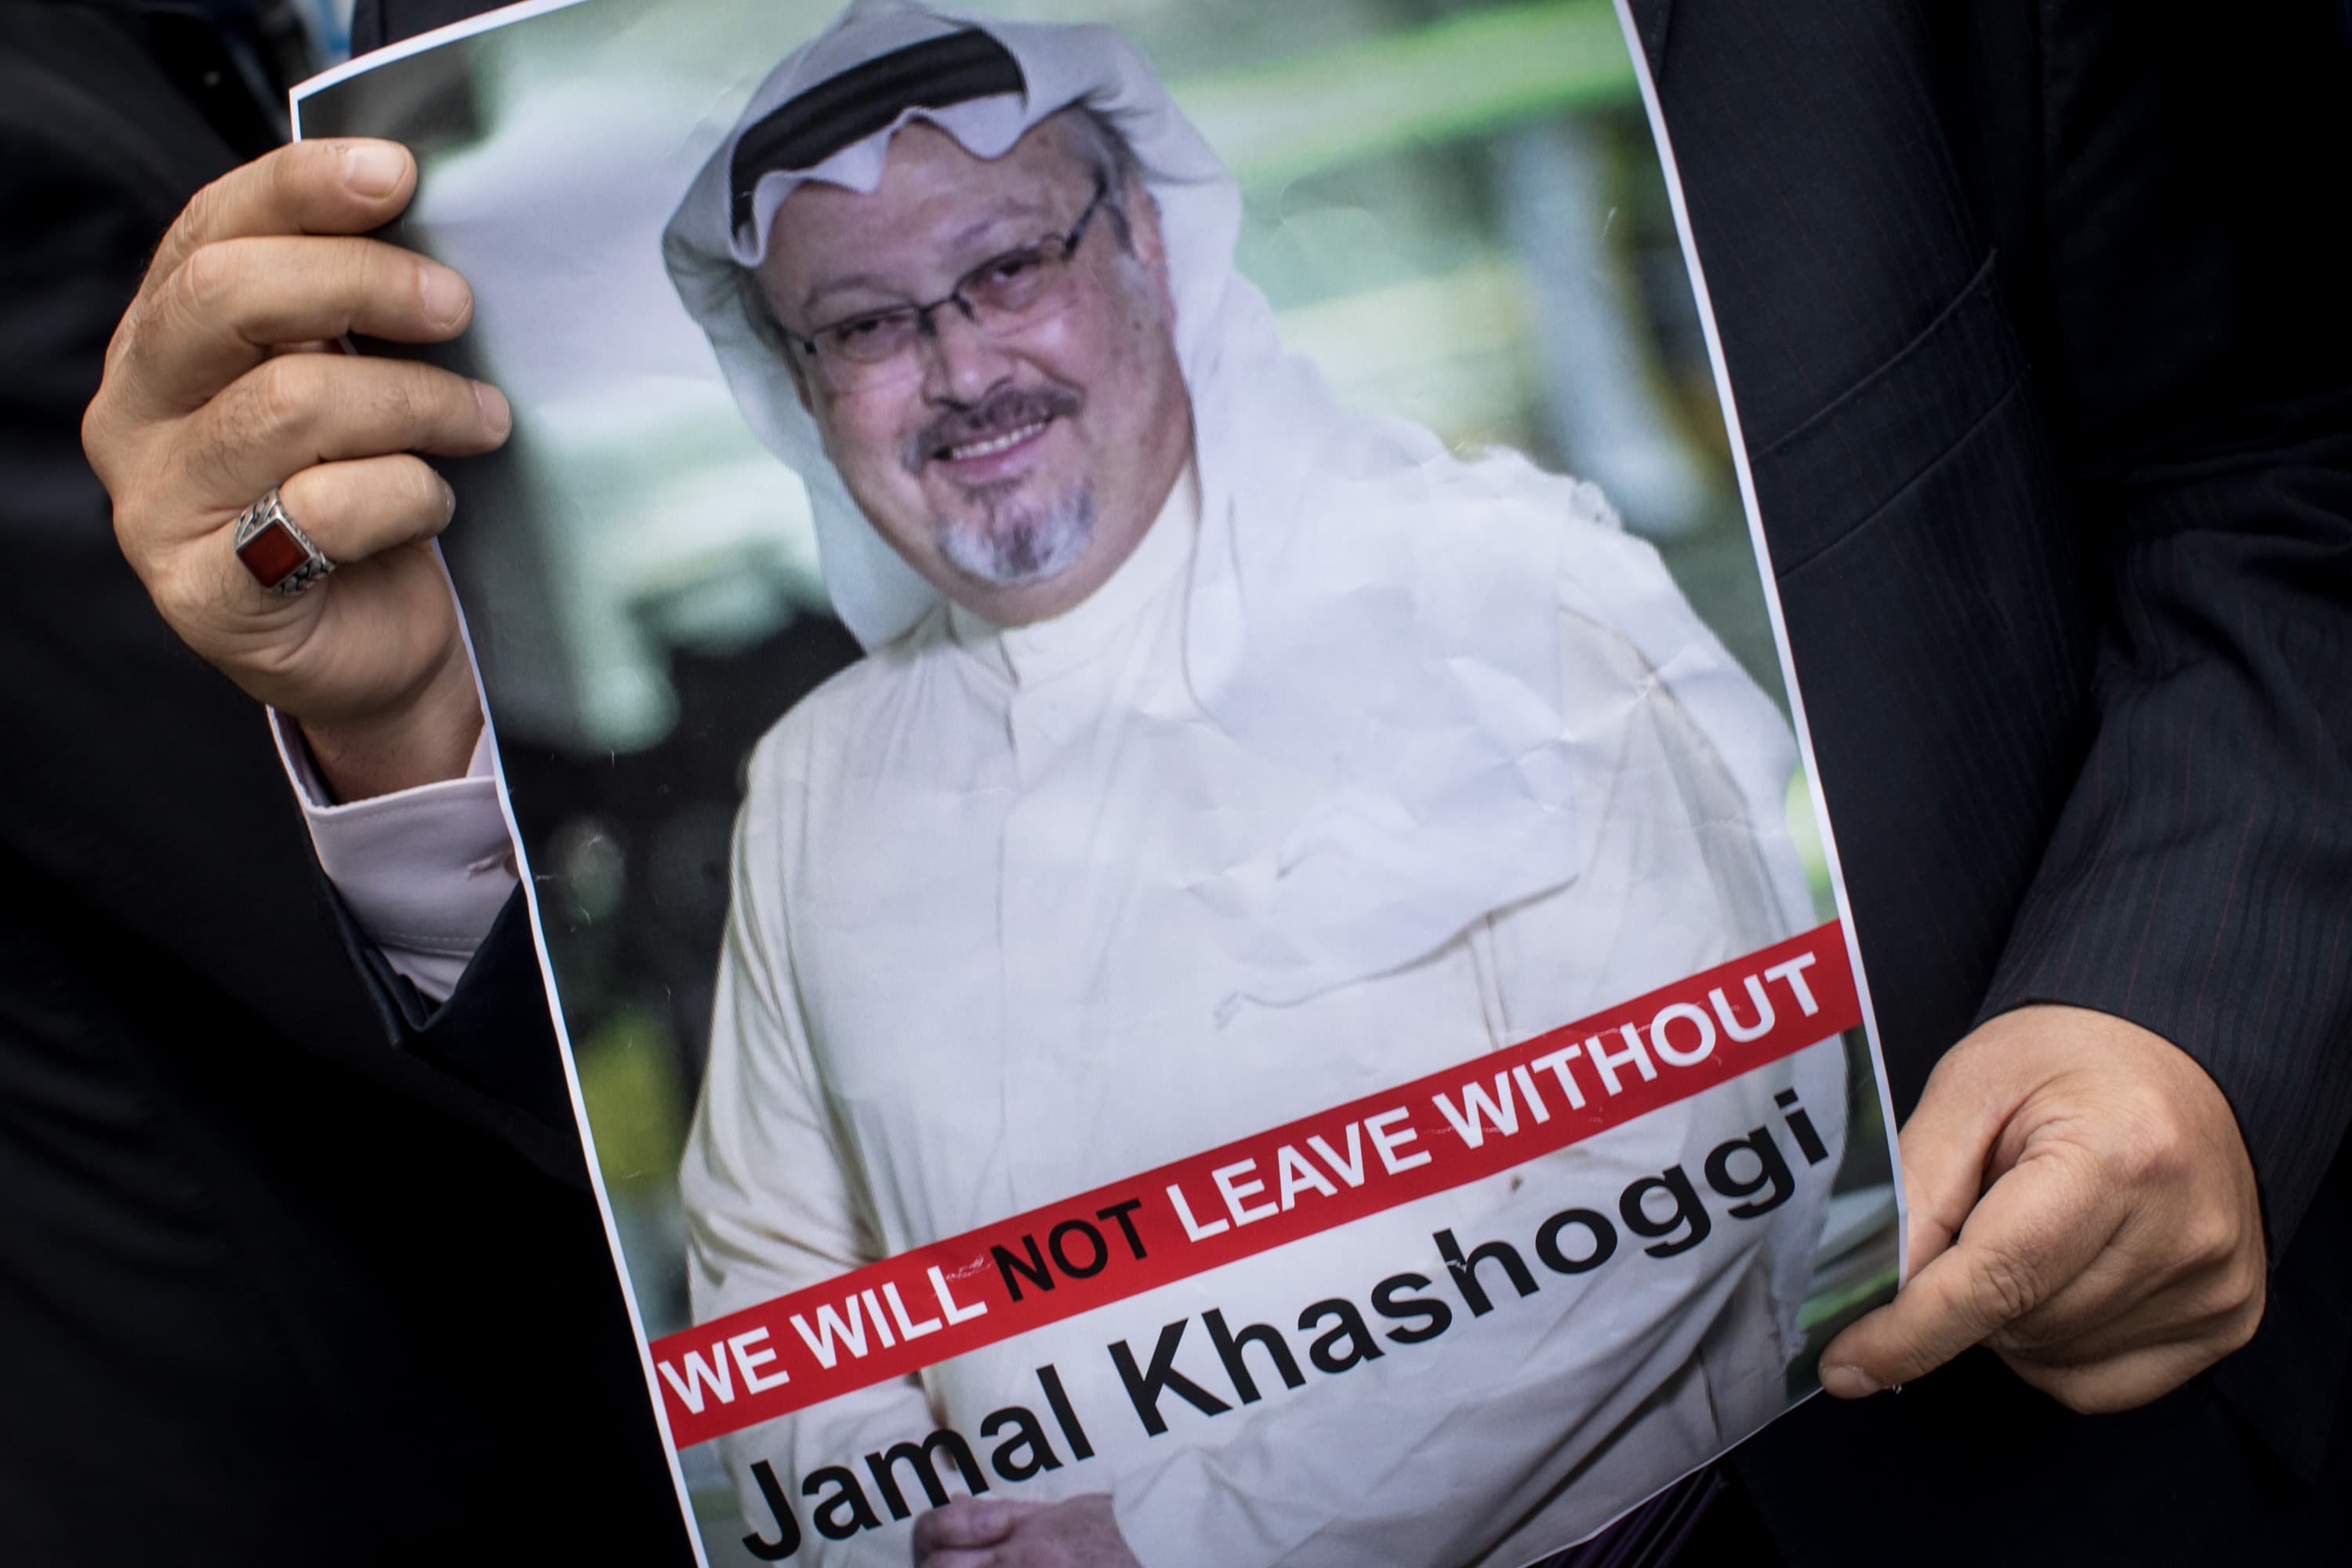 Saudi Arabia claims Khashoggi was killed in a fight, contrary to other accounts